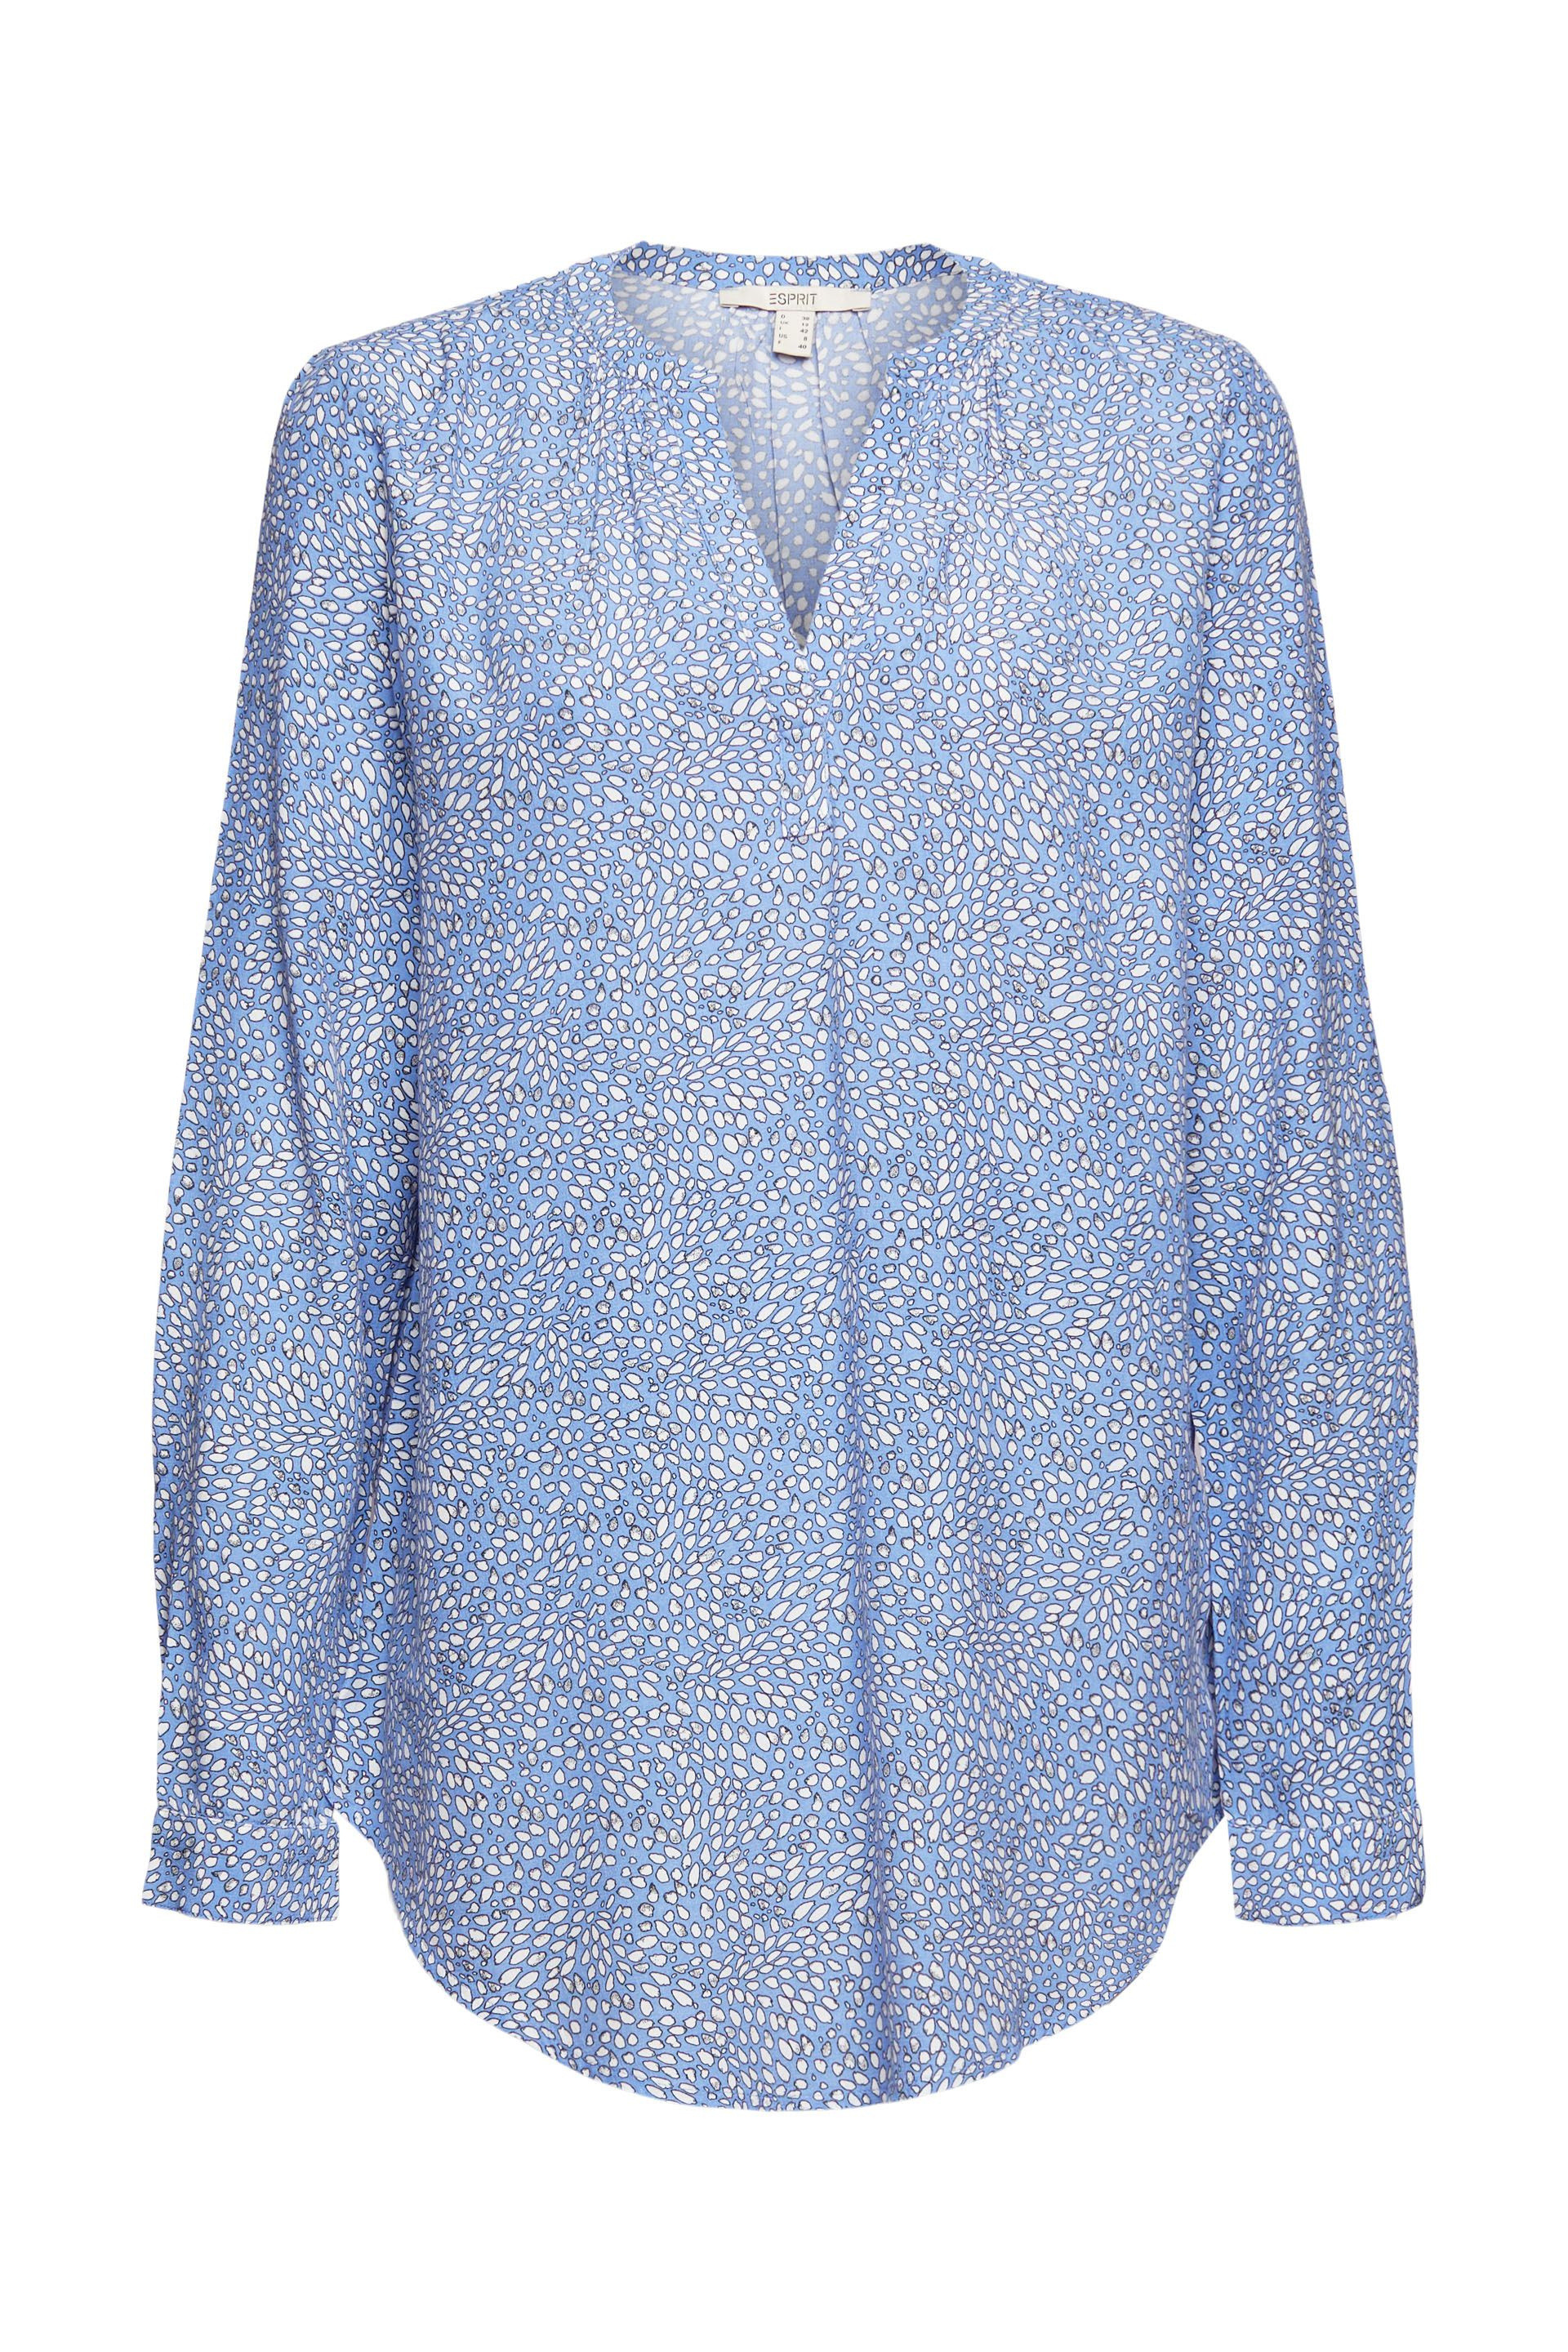 Blouse with pattern, Light Blue, large image number 0